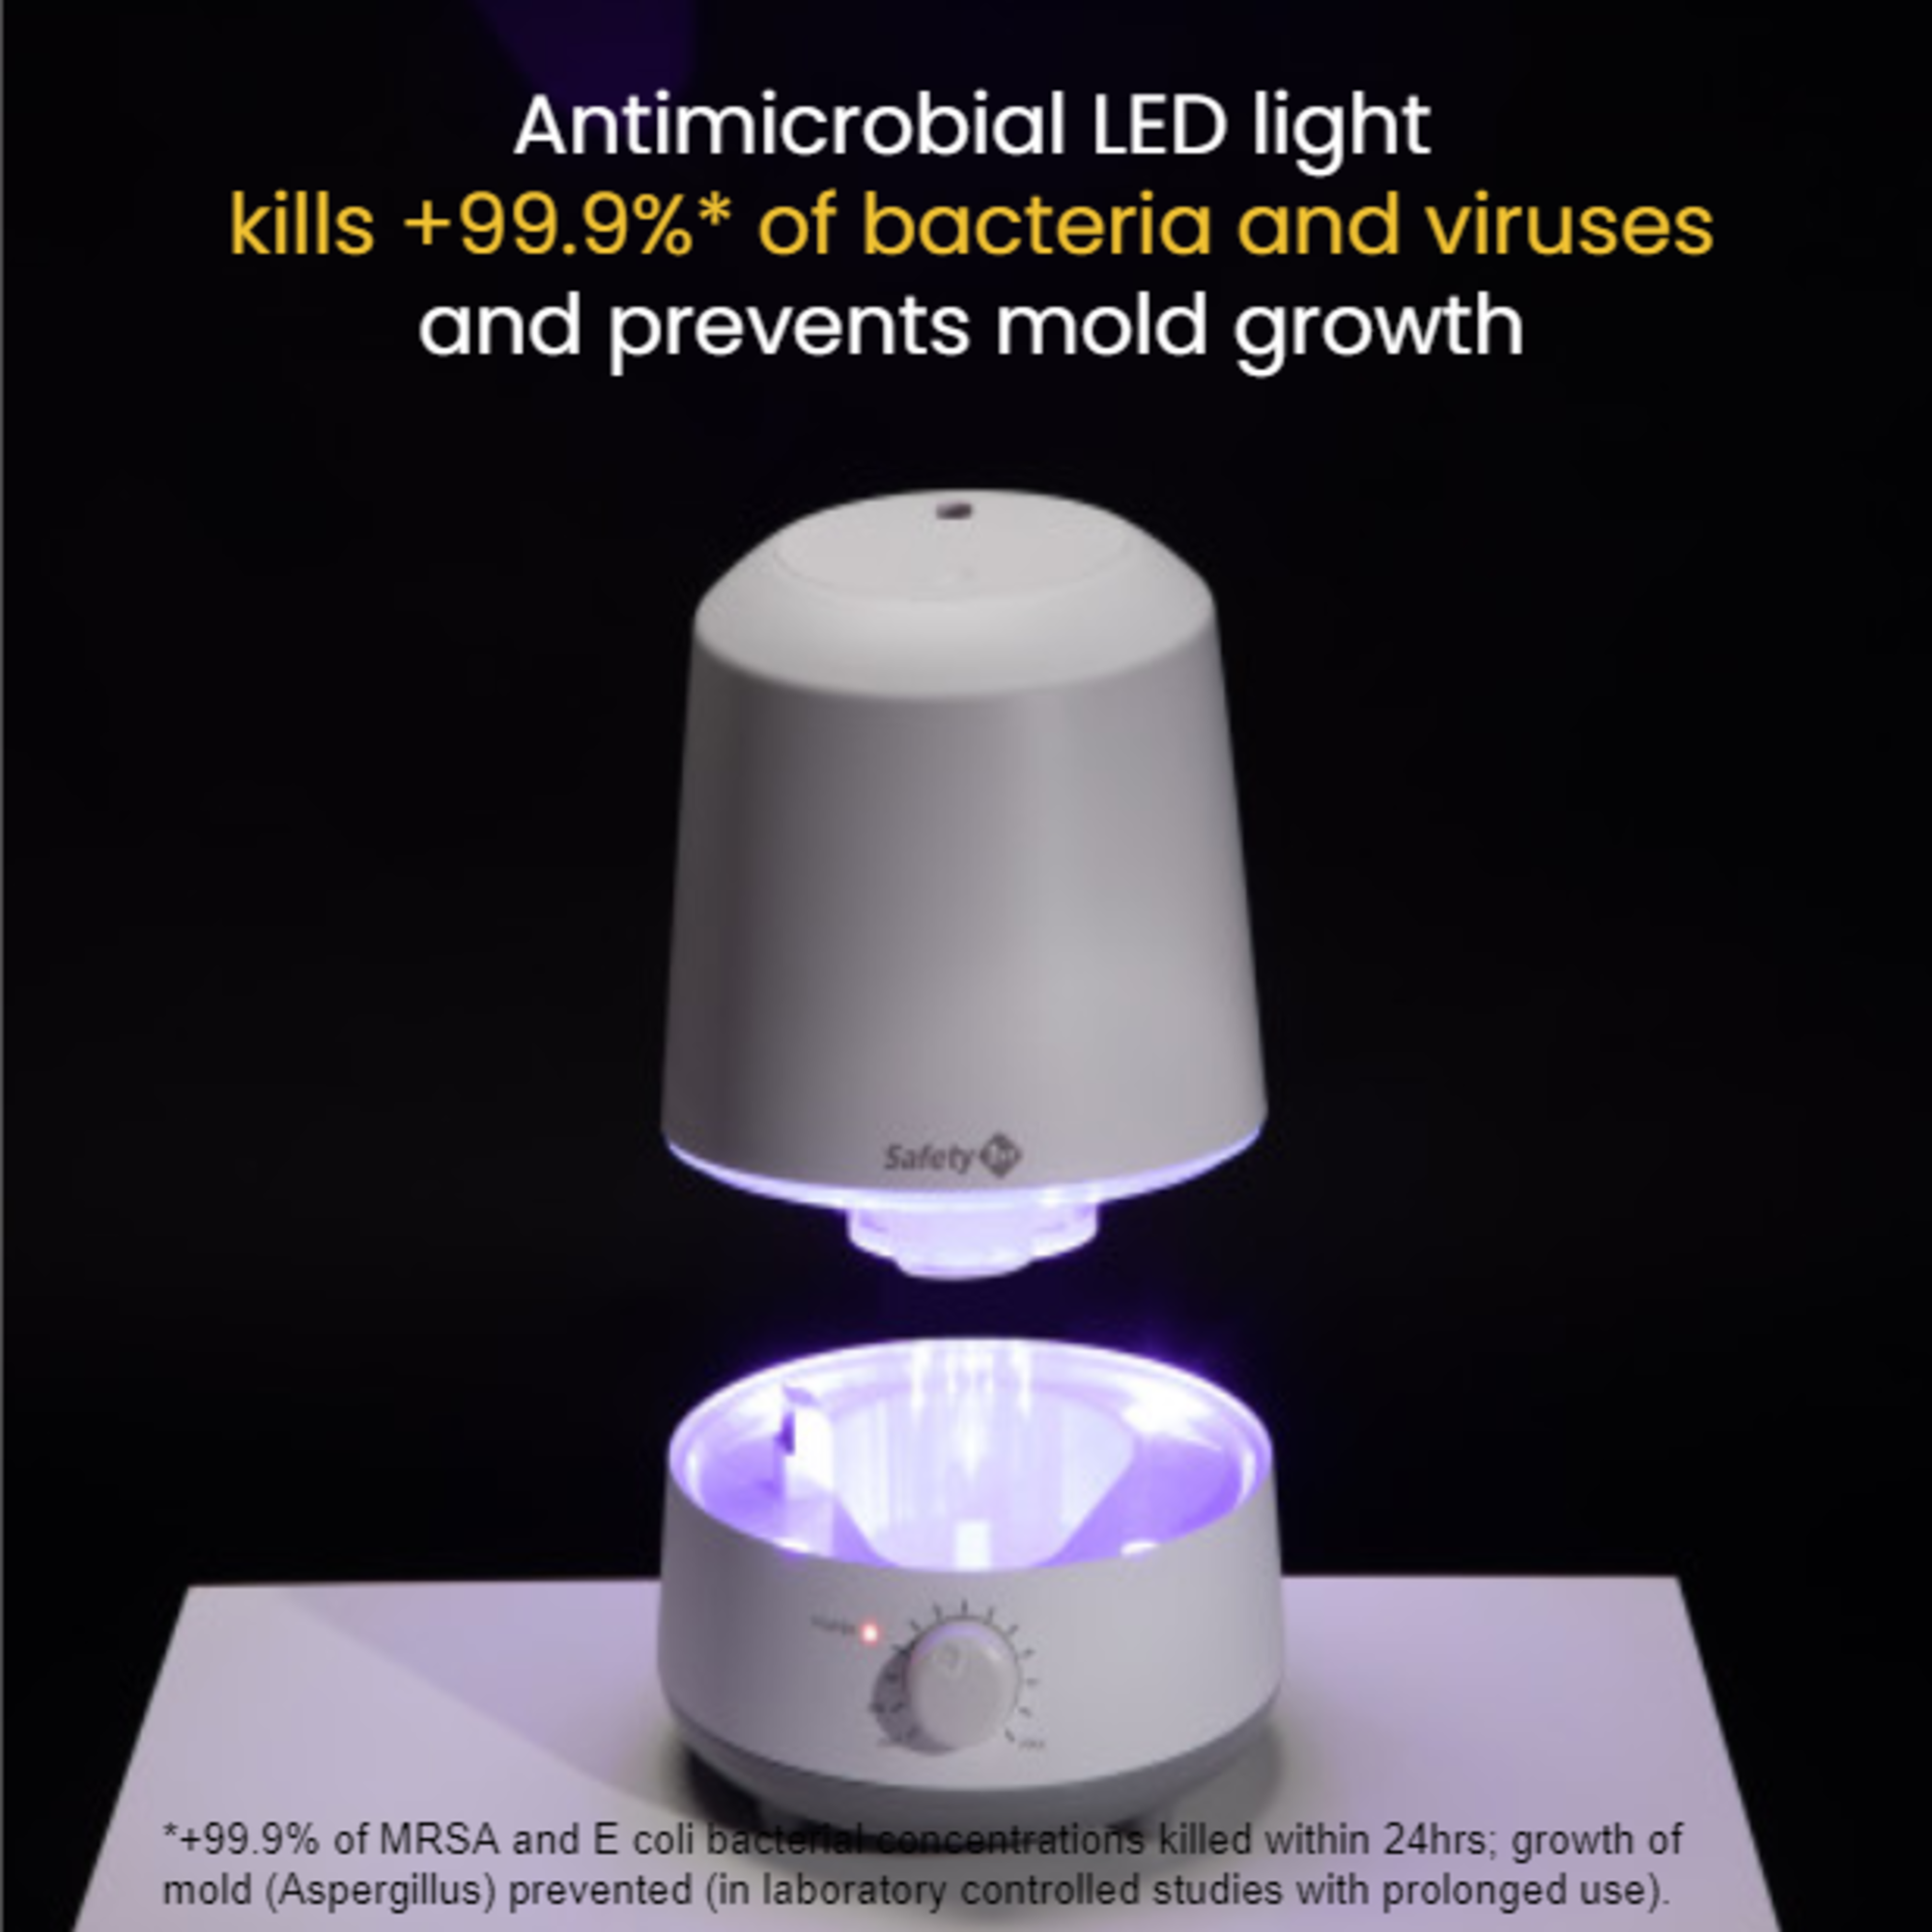 Antimicrobial LED light kills +99.9% of bacteria and viruses and prevents mold growth